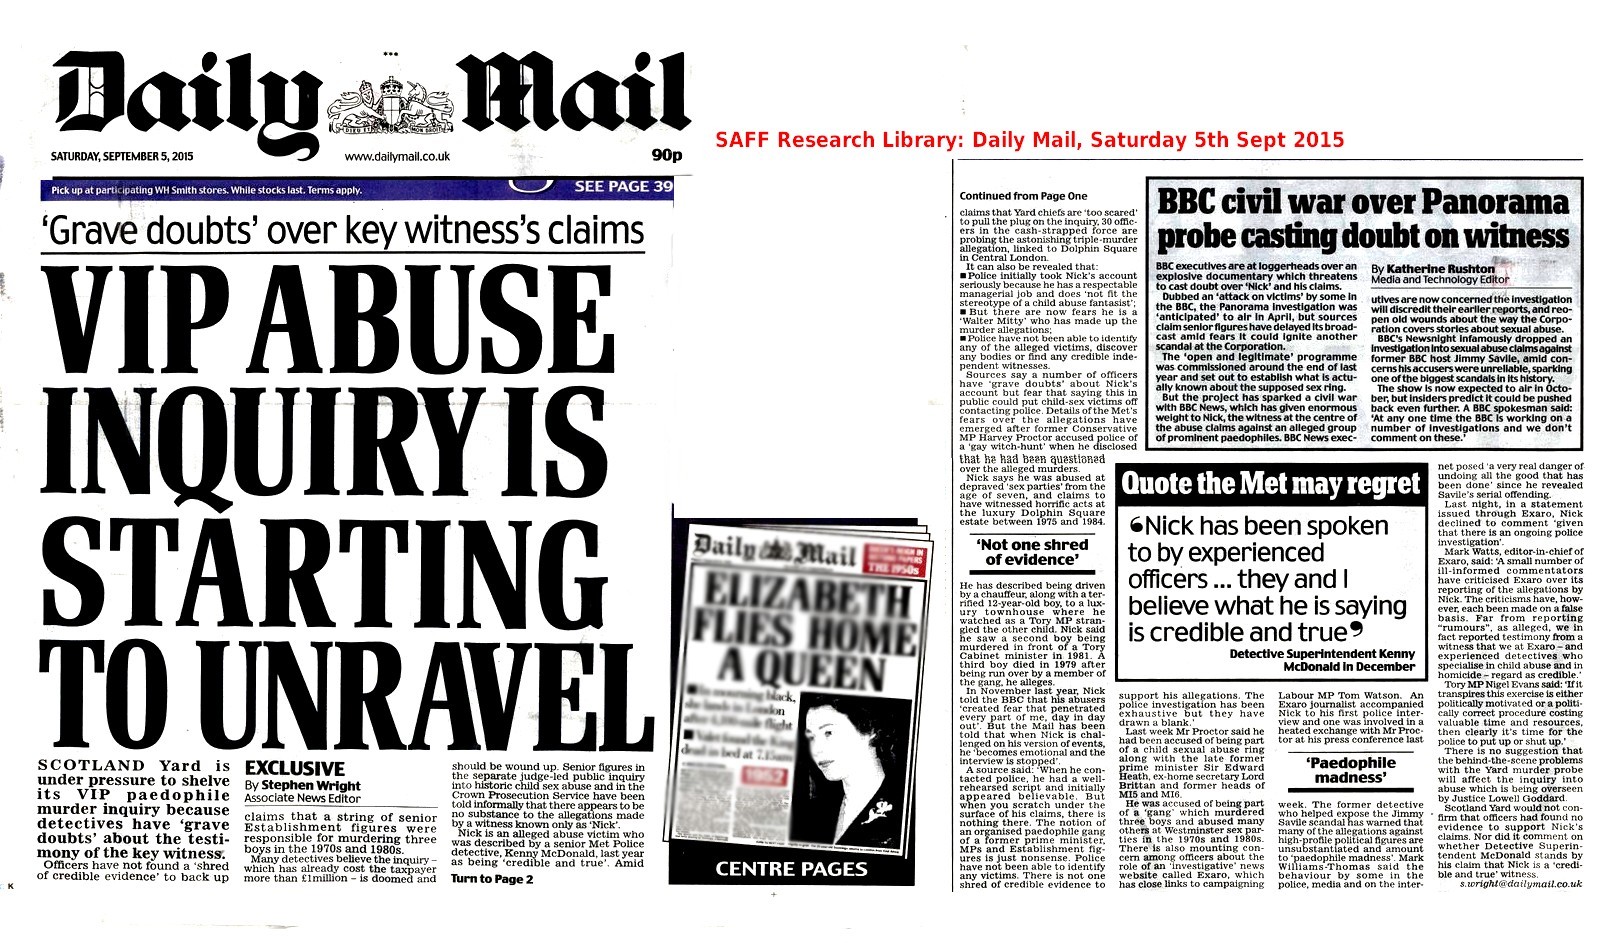 Police report no evidence to substantiate 'Nick's' Westminster Paedo allegations: Daily Mail